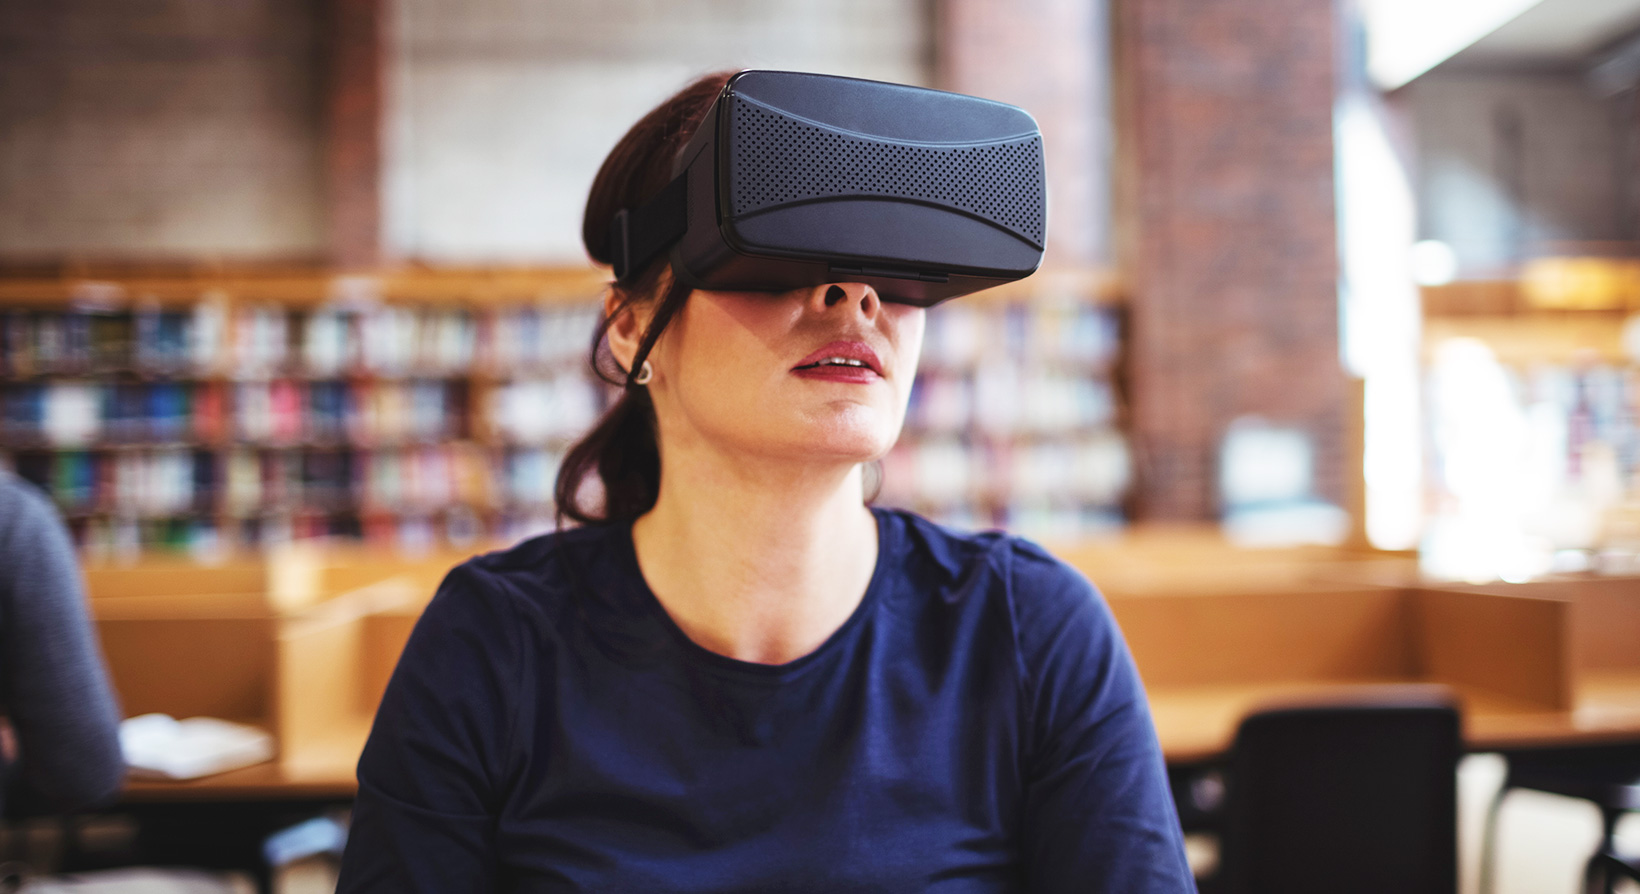 Mature student using virtual reality headset in public library